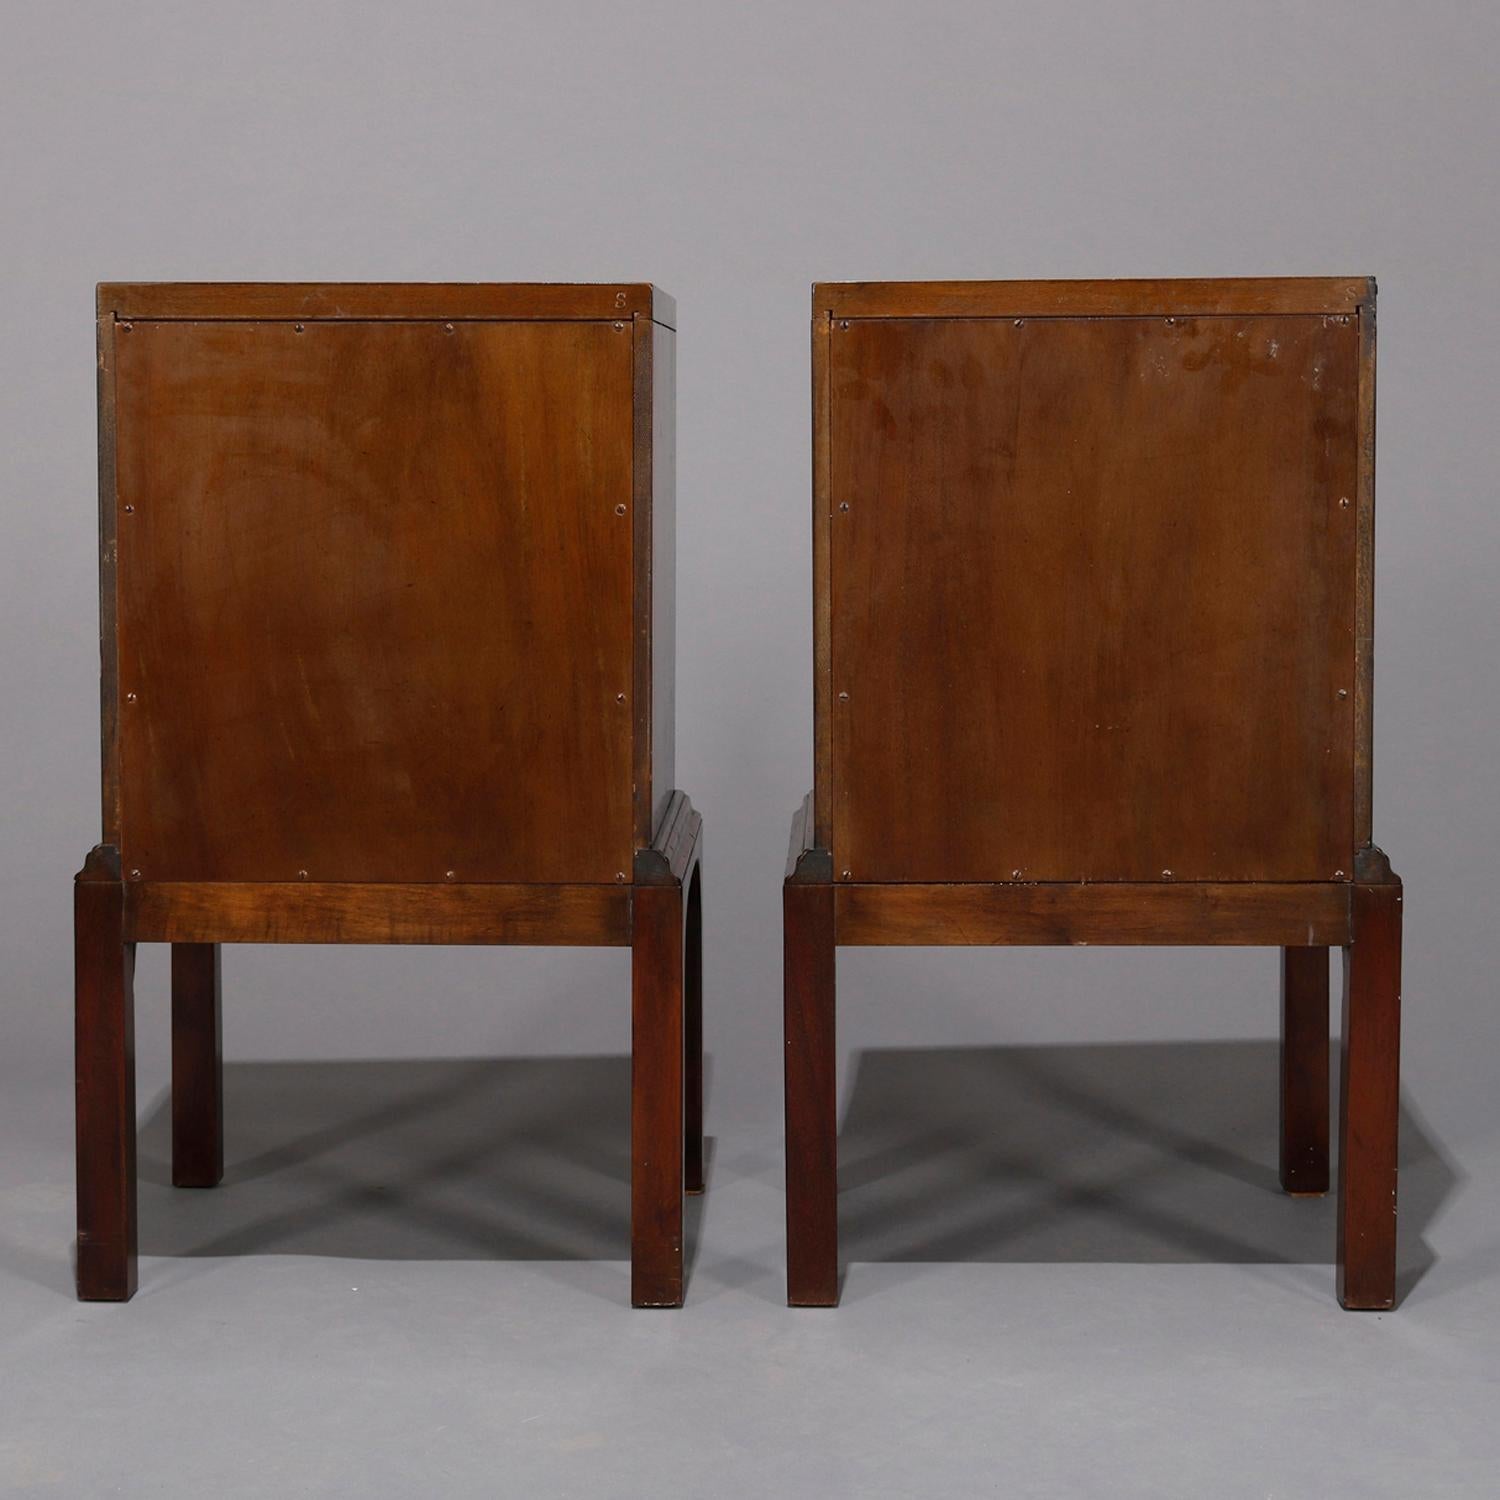 20th Century Pair of Vintage Mahogany Kittinger Chinese Chippendale Stands, circa 1950